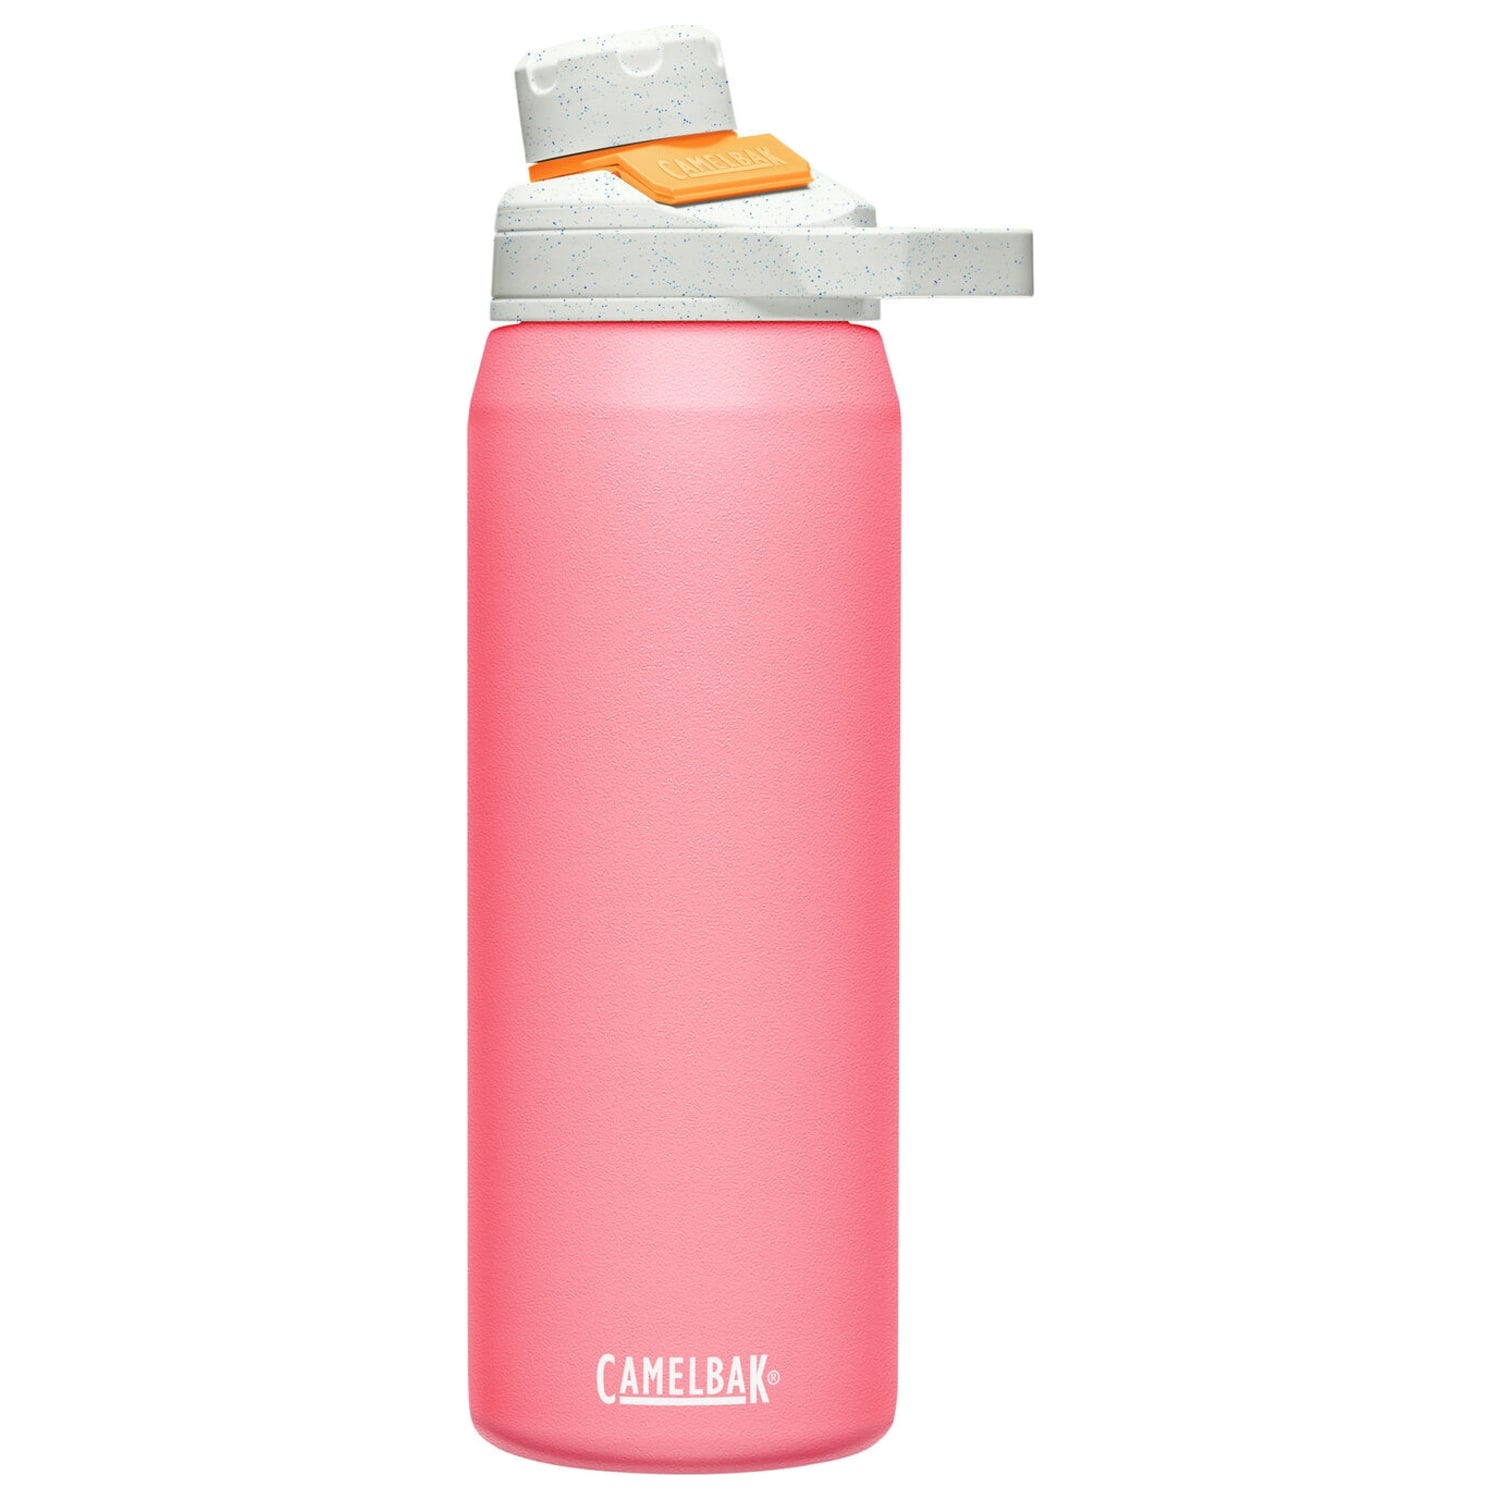 CamelBak | Chute® Mag Insulated SS Drink Bottle | 750ml - Limited Edition Colour Crush II